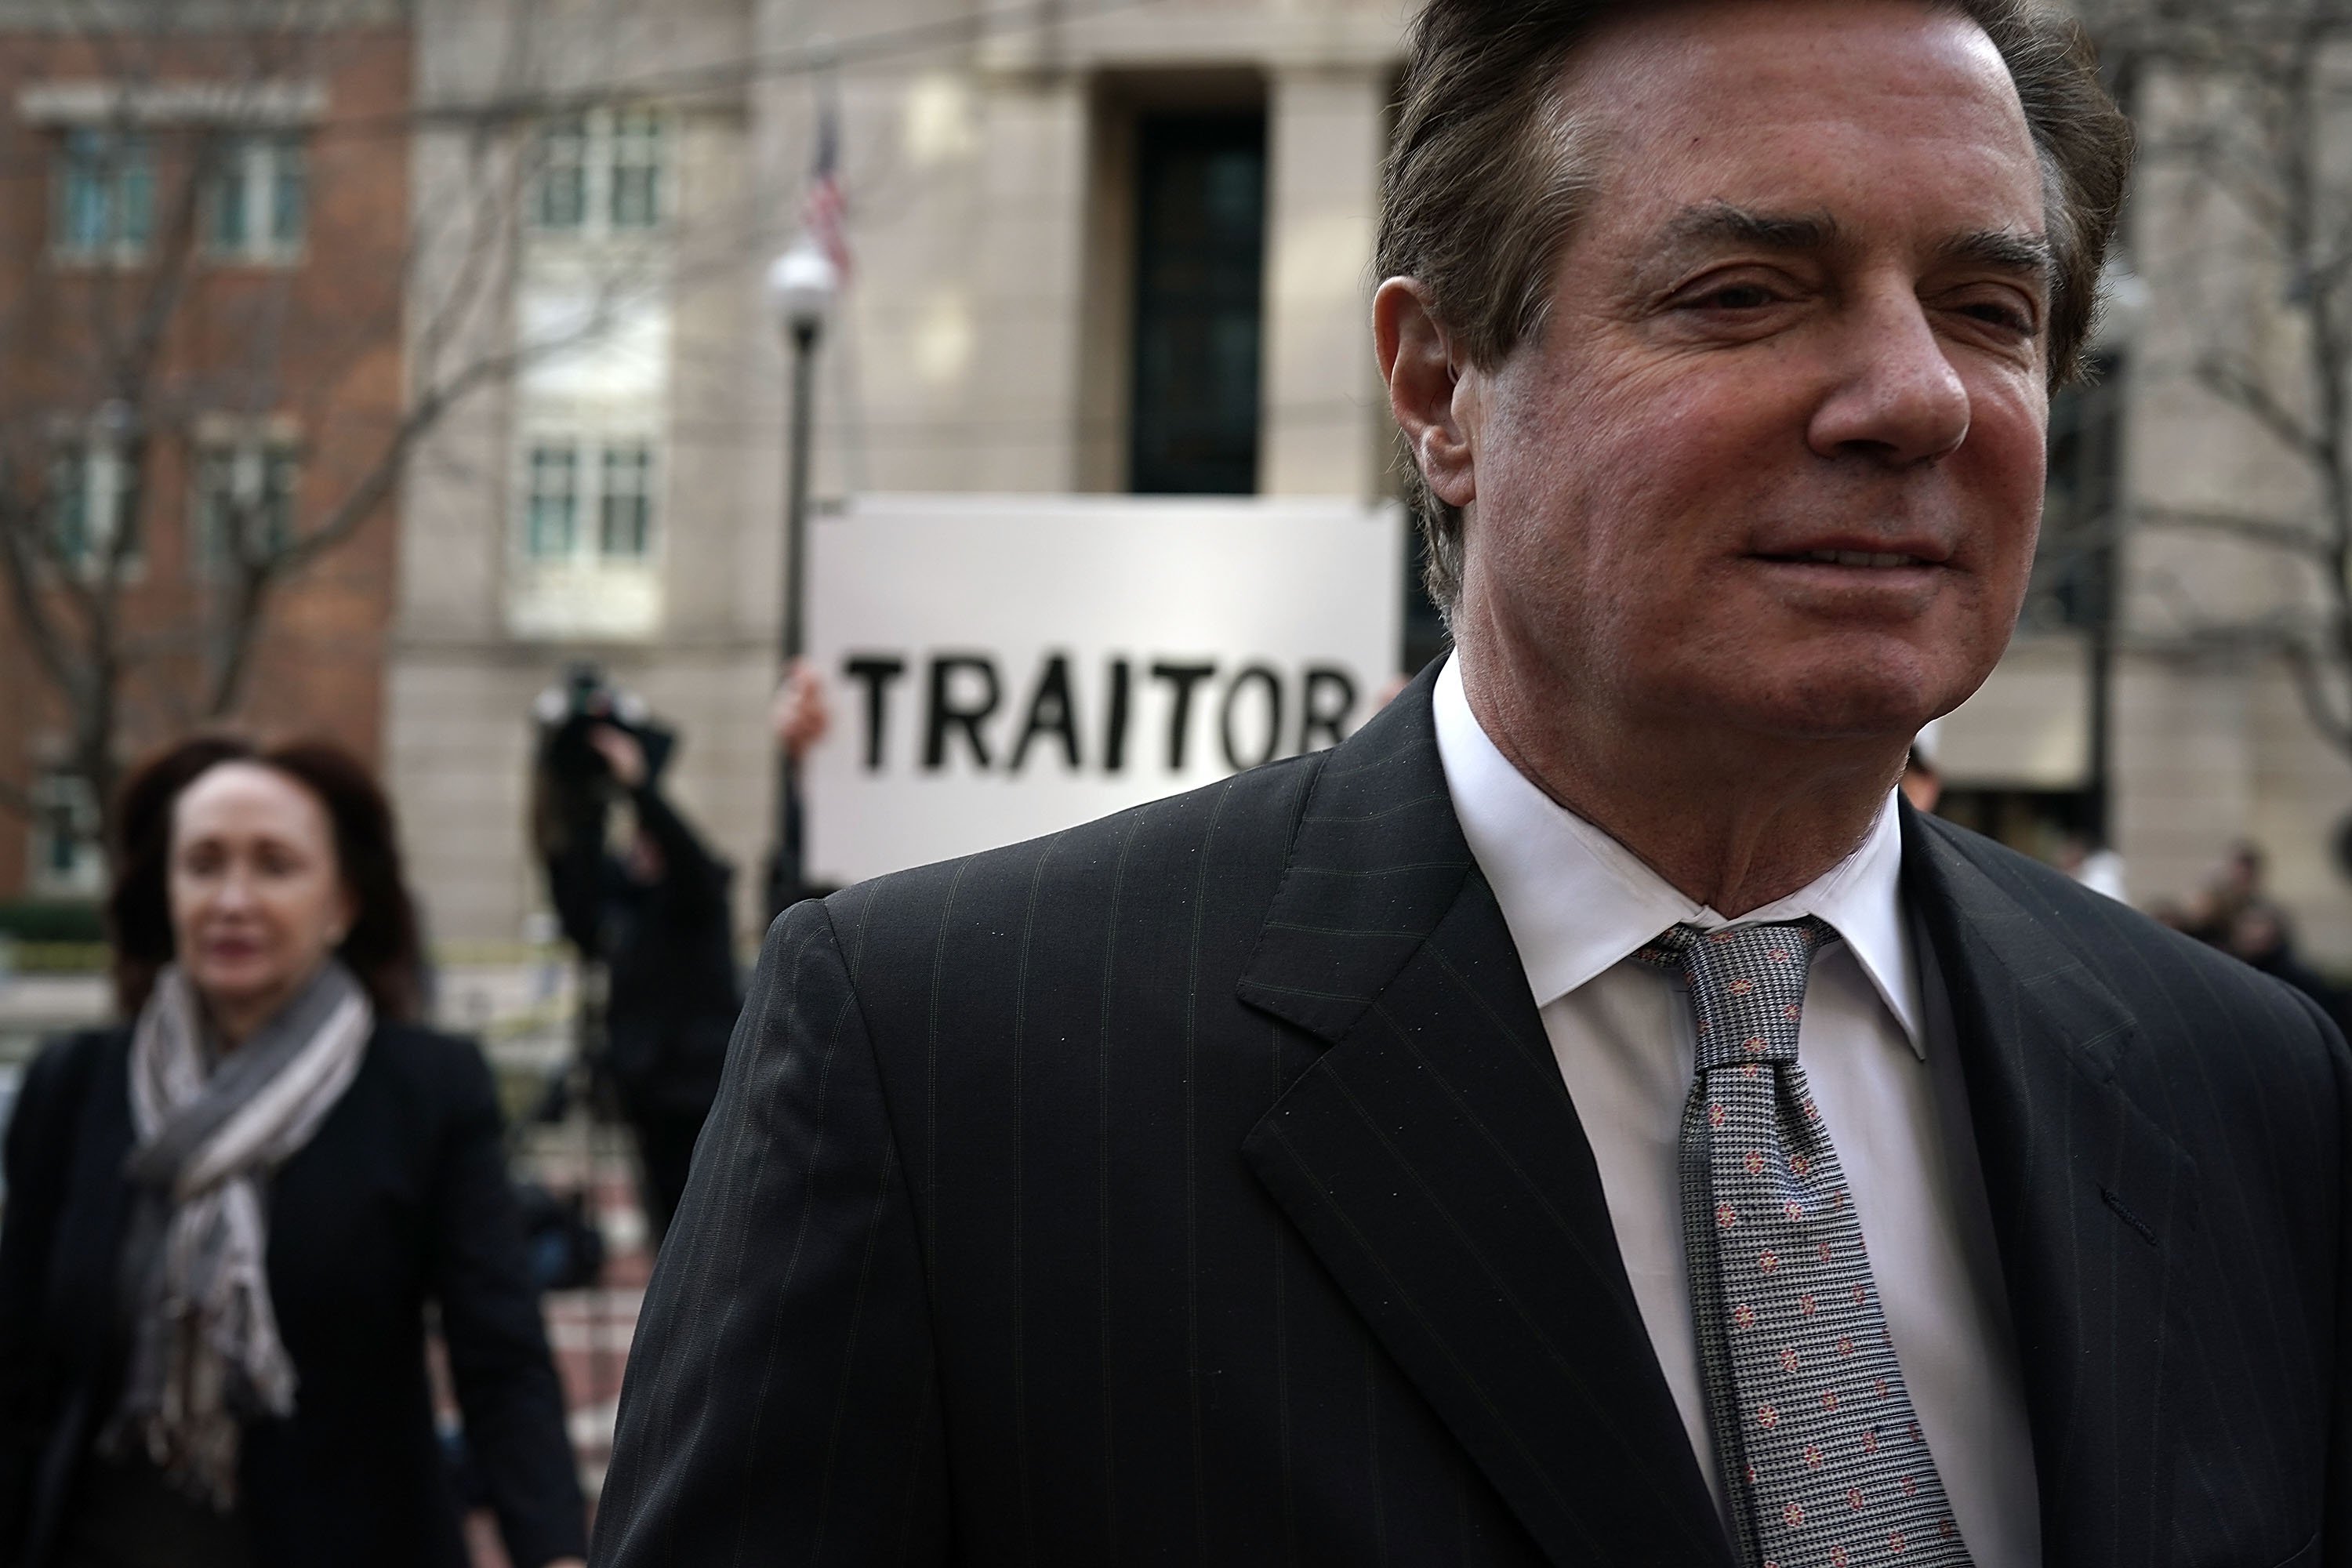 Paul Manafort leaving the Albert V. Bryan U.S. Courthouse in Alexandria, Virginia | Photo: Getty Images